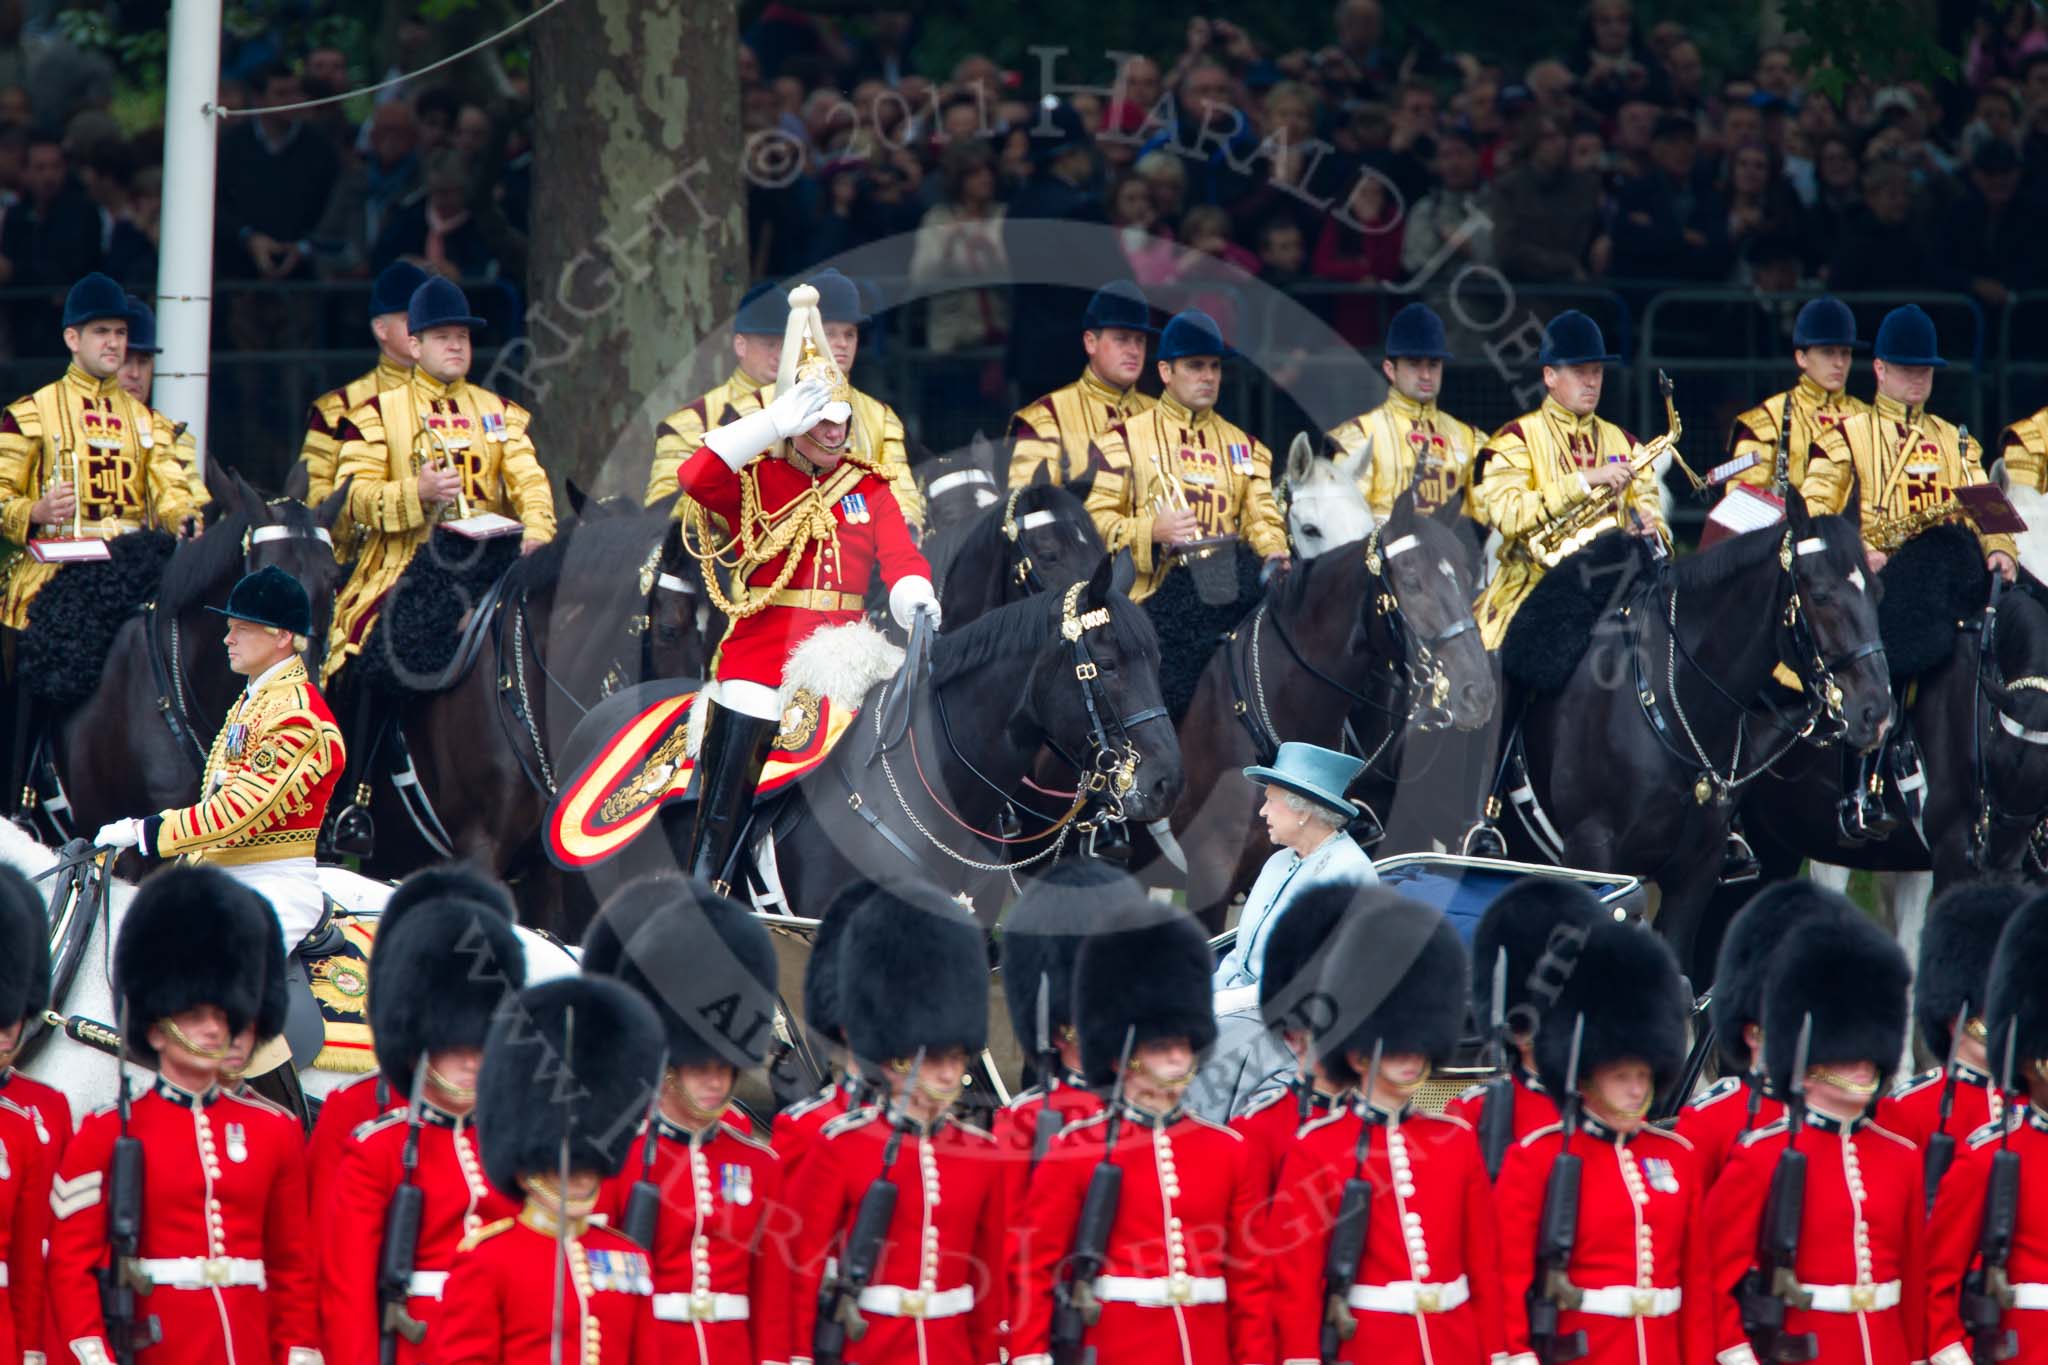 Trooping the Colour 2011: HM The Queen during the inspection of the troops. In charge of the ivory mounted phaeton Jack Hargreaves, Head Coachman. In the front, No. 5 Guard, 1st Battalion Welsh Guards, and in the background the Mounted Bands of the Household Cavalry, with Major K L Davies, The Life Guards, Director of Music, saluting..
Horse Guards Parade, Westminster,
London SW1,
Greater London,
United Kingdom,
on 11 June 2011 at 11:05, image #163